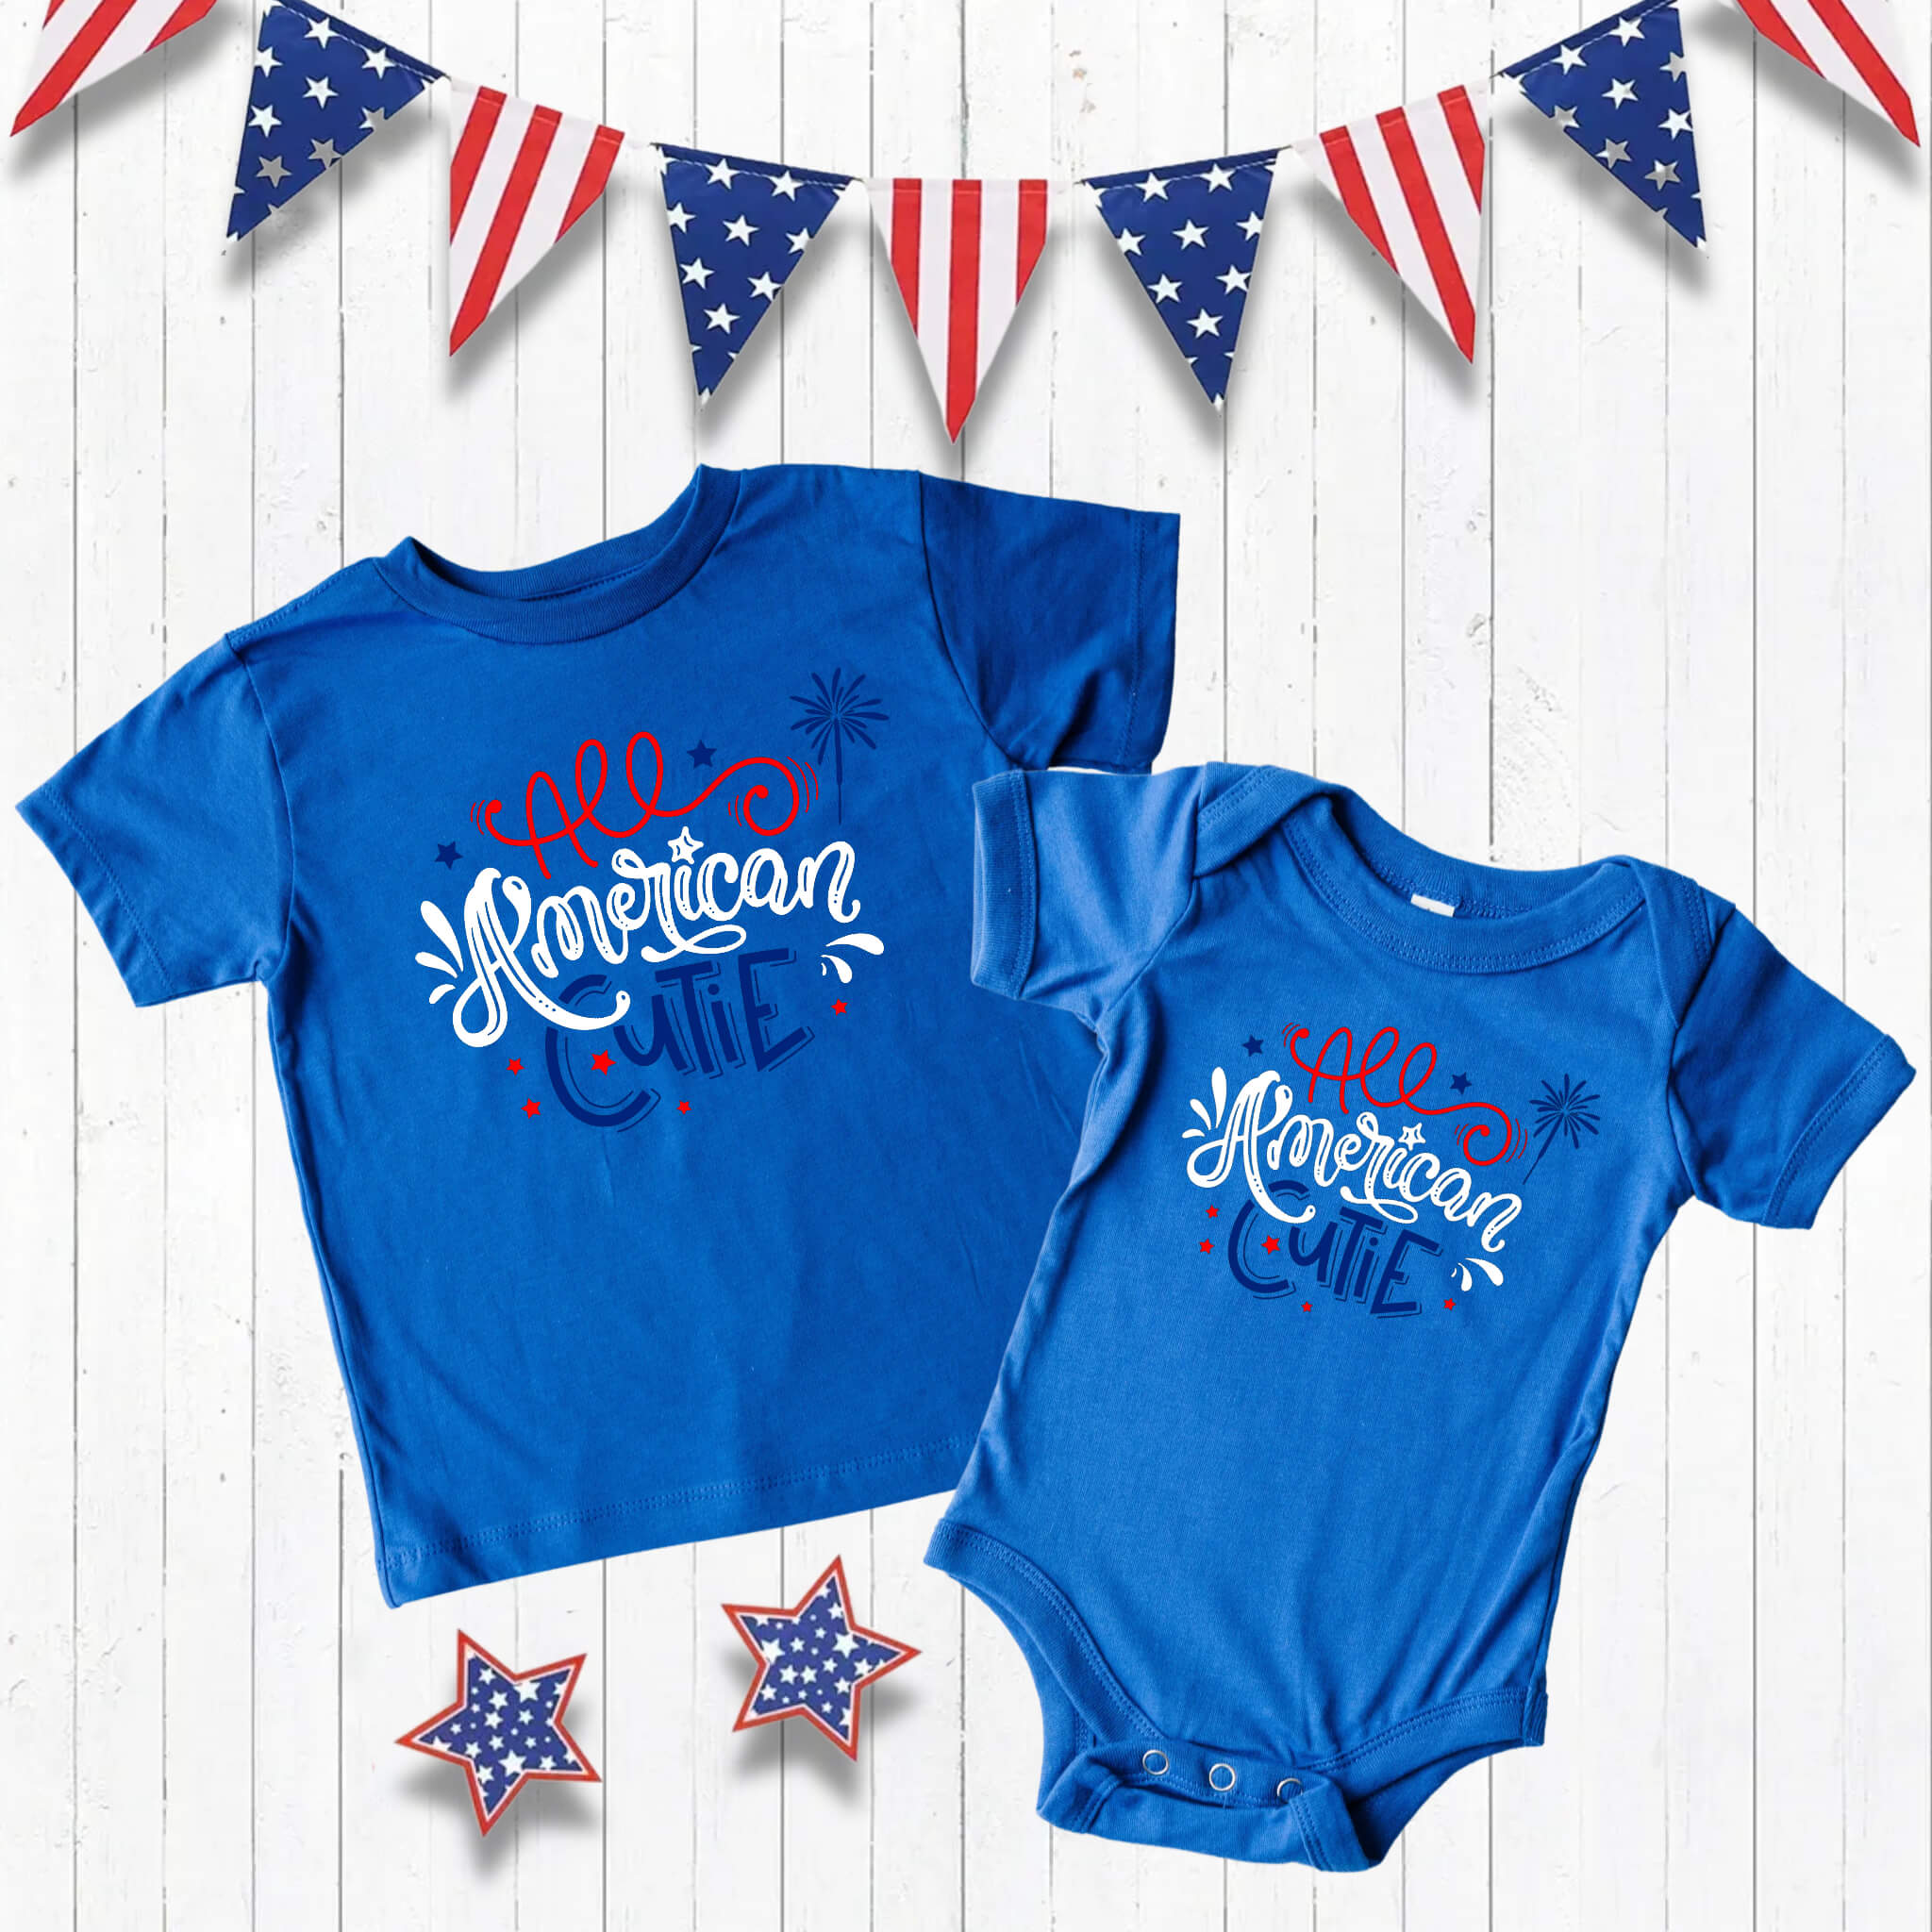 4th of July - All American Cutie Patriotic Boy’s Girl’s Unisex Graphic Print Onesie / T-shirt